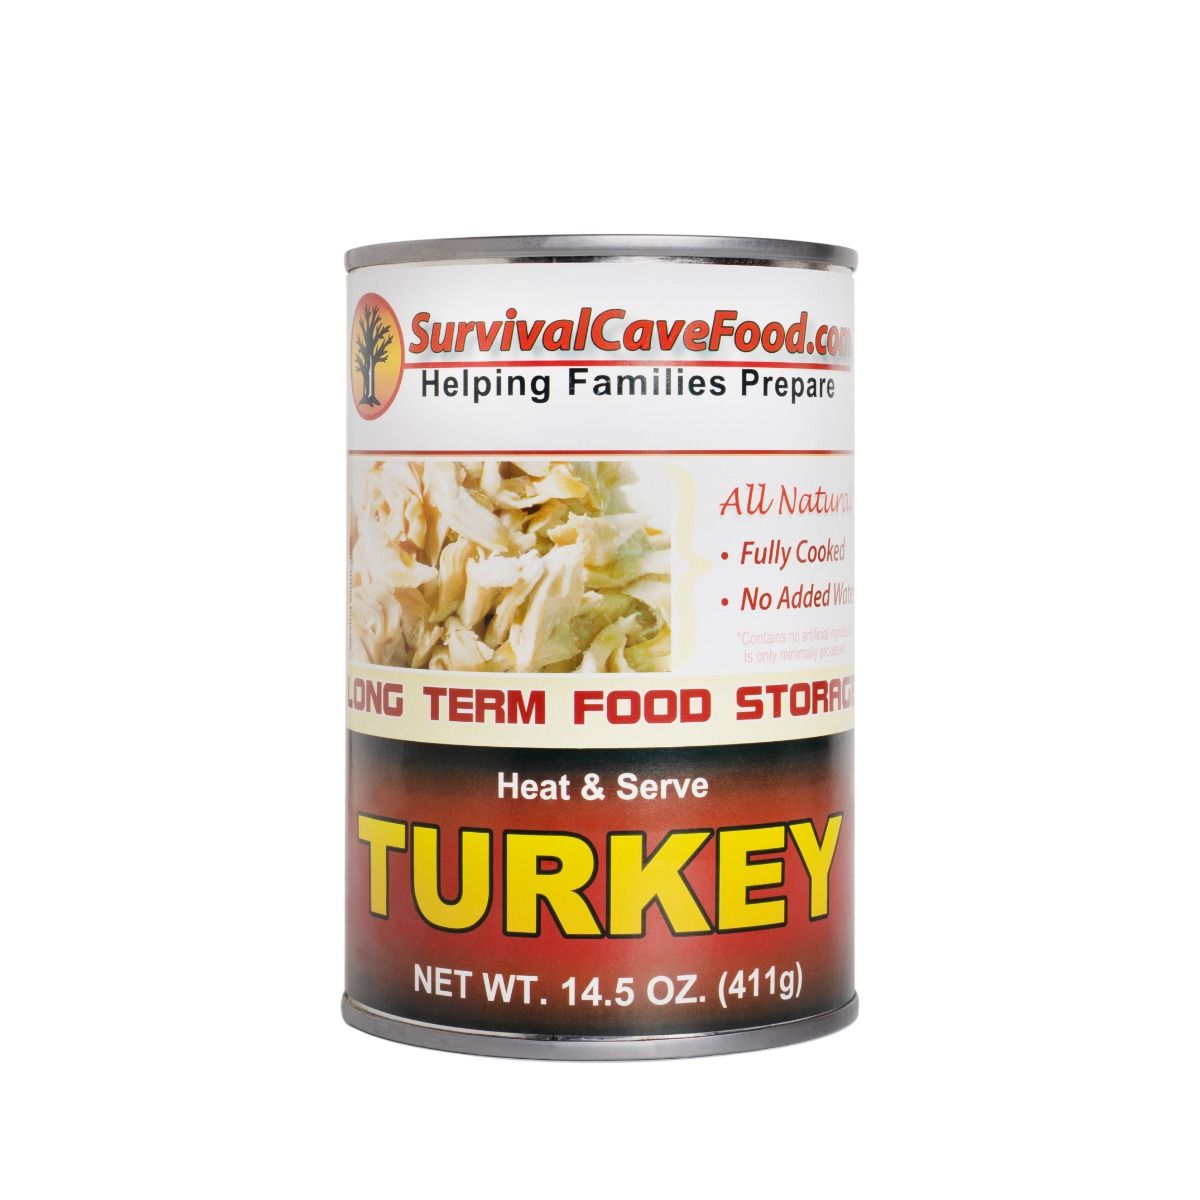 Full Case of Canned Turkey for Food Storage - 12 Cans, 60 Servings, 14.5 oz Each.